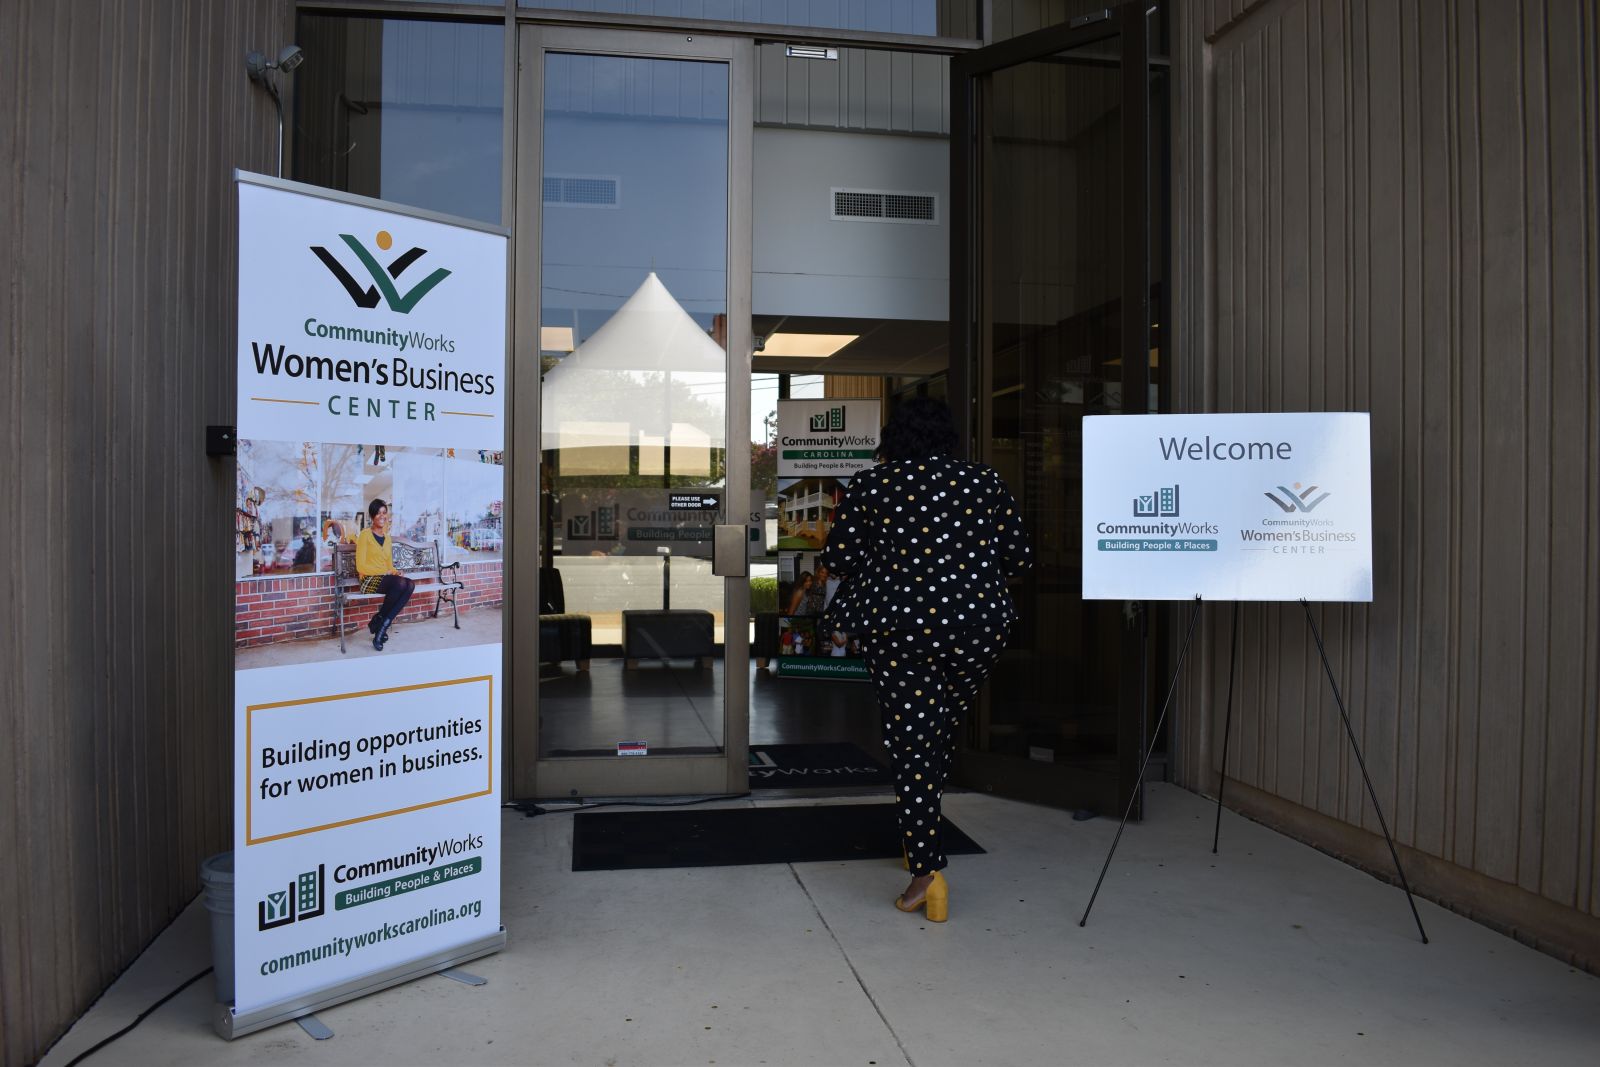 CommunityWorks opened its Women's Business Center Sept. 4. (Photo/Molly Hulsey)